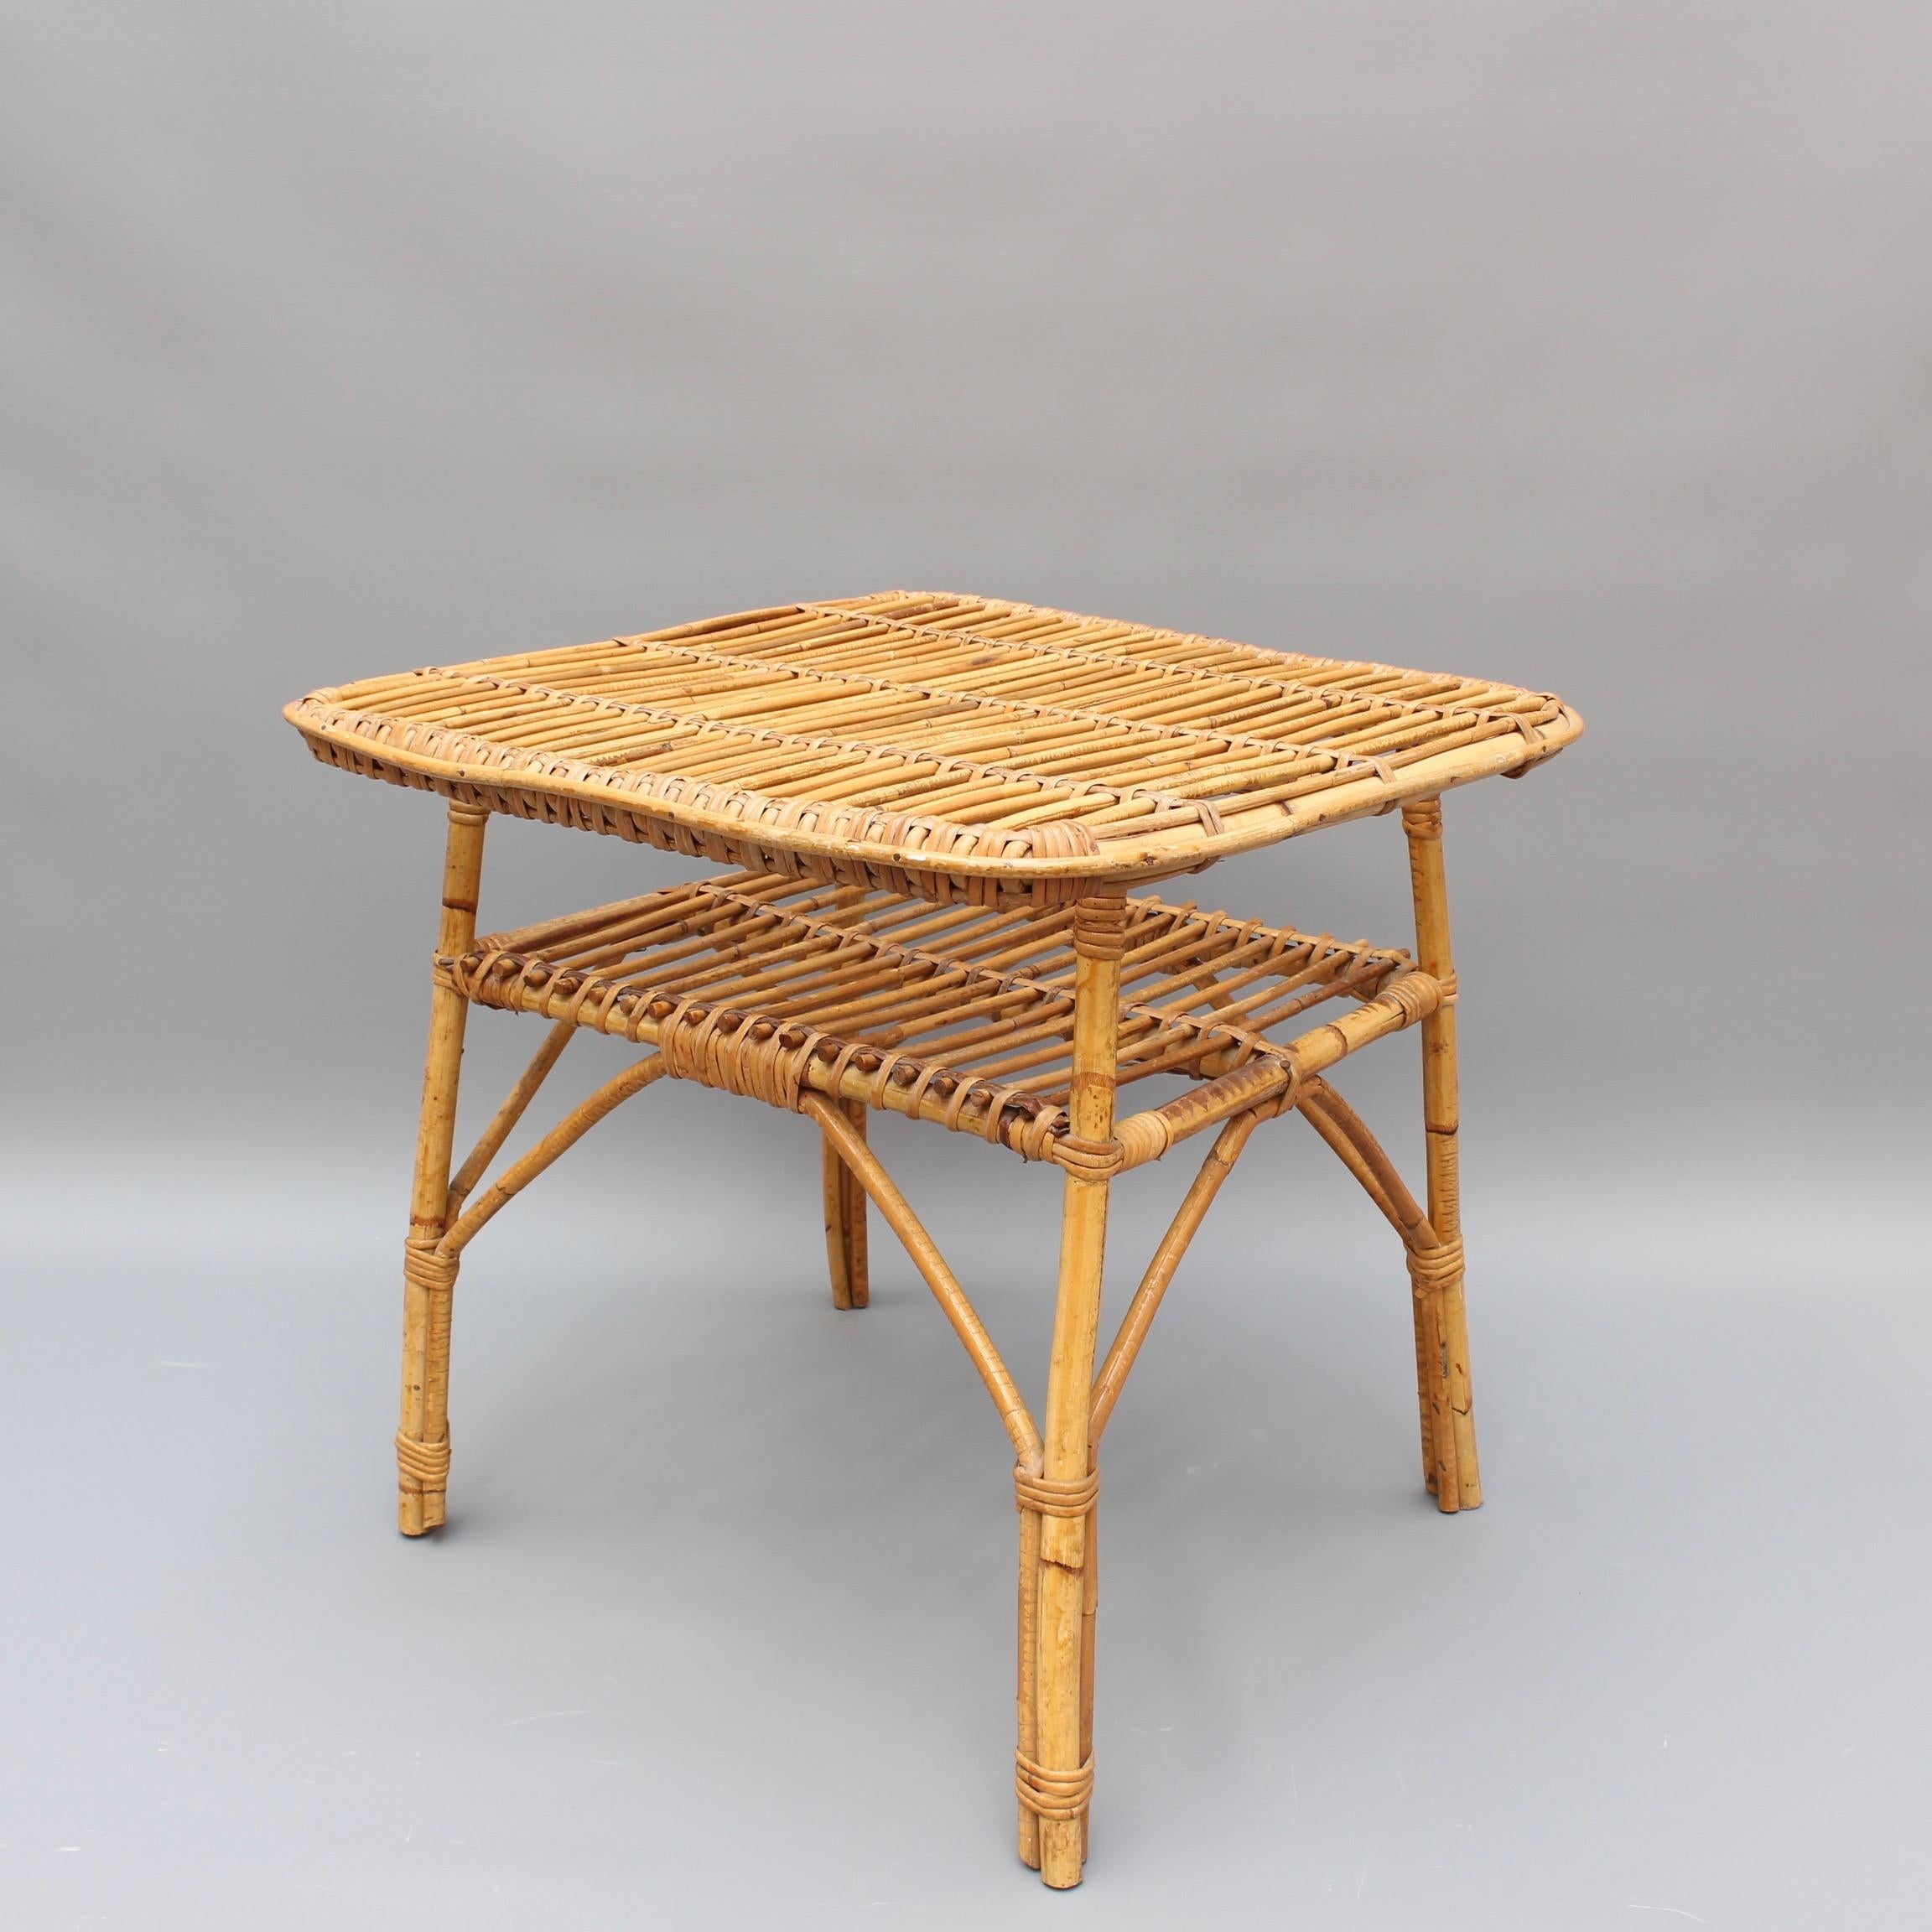 Rattan Italian coffee / end table (circa 1960s). A very stylish piece with slews of character and charm. There are two horizontal surfaces for storage or display. The smart-looking cane legs and frame are fastened together with tight-gripping but